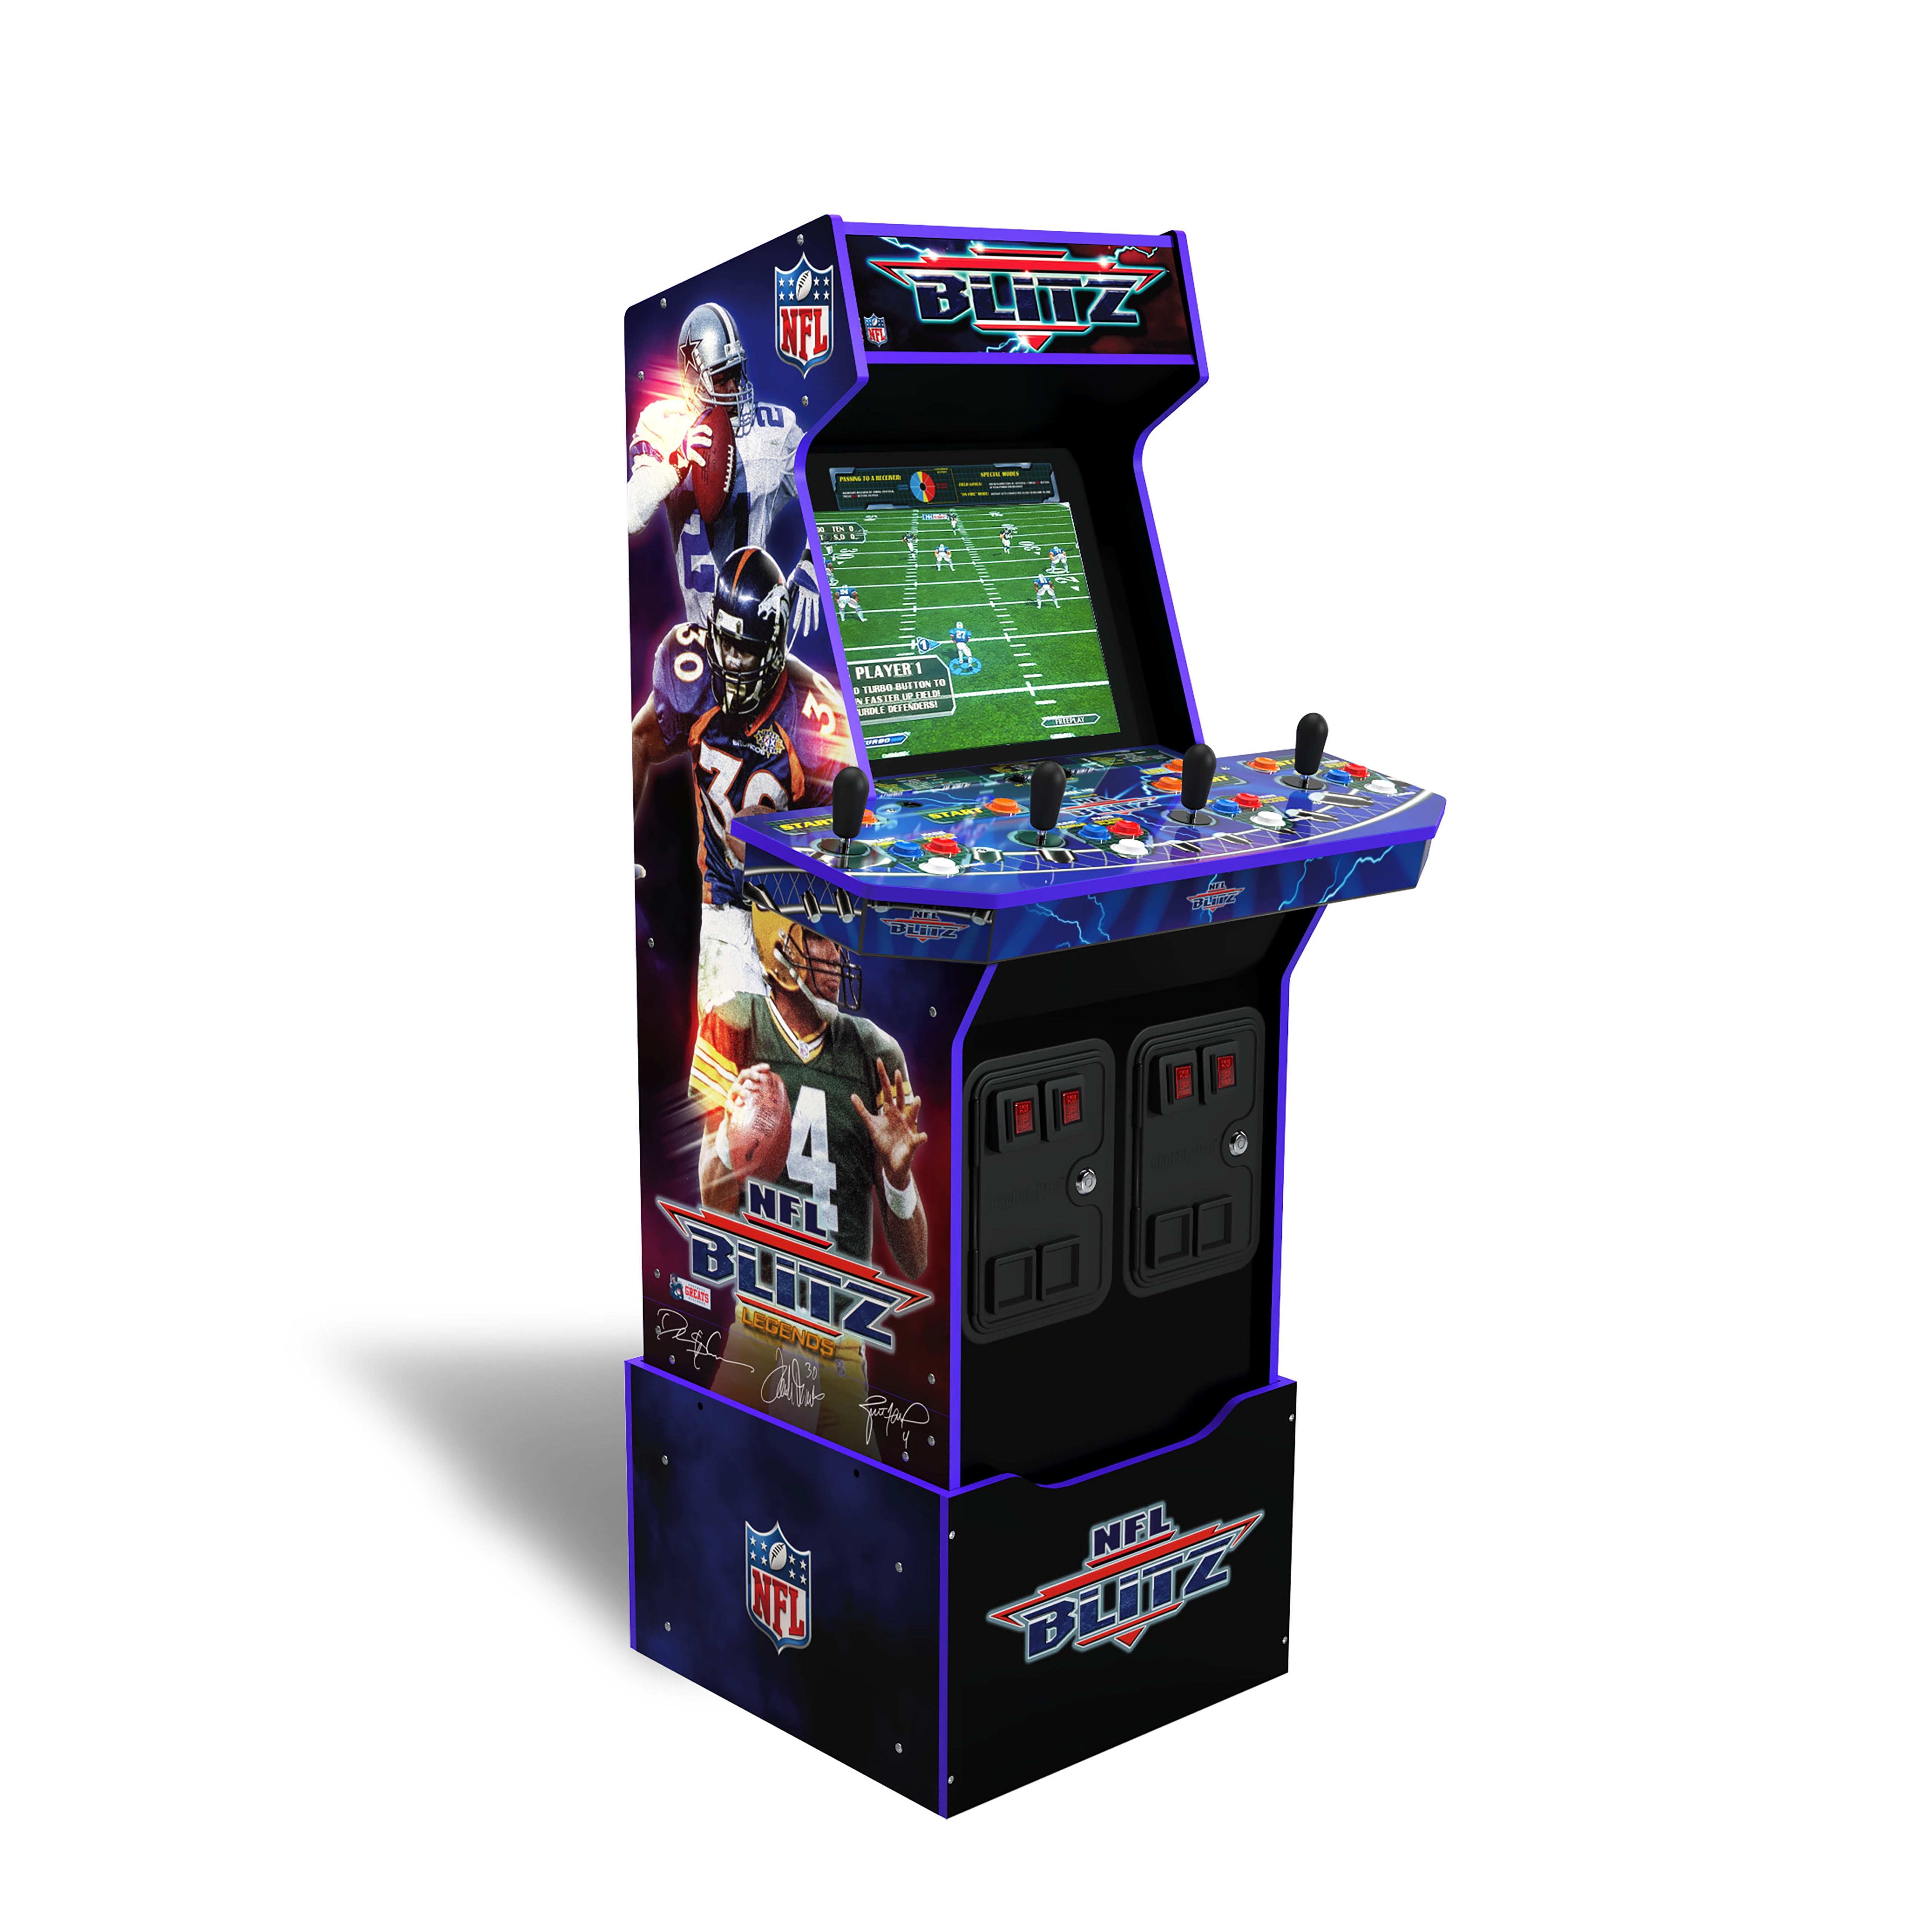 GWALSNTH 3D Pandora Box 18S Pro Arcade Games Console, 10000 in 1 HD Video  Games Machine,Plug and Play Games at Home,WiFi Function to Add More Games